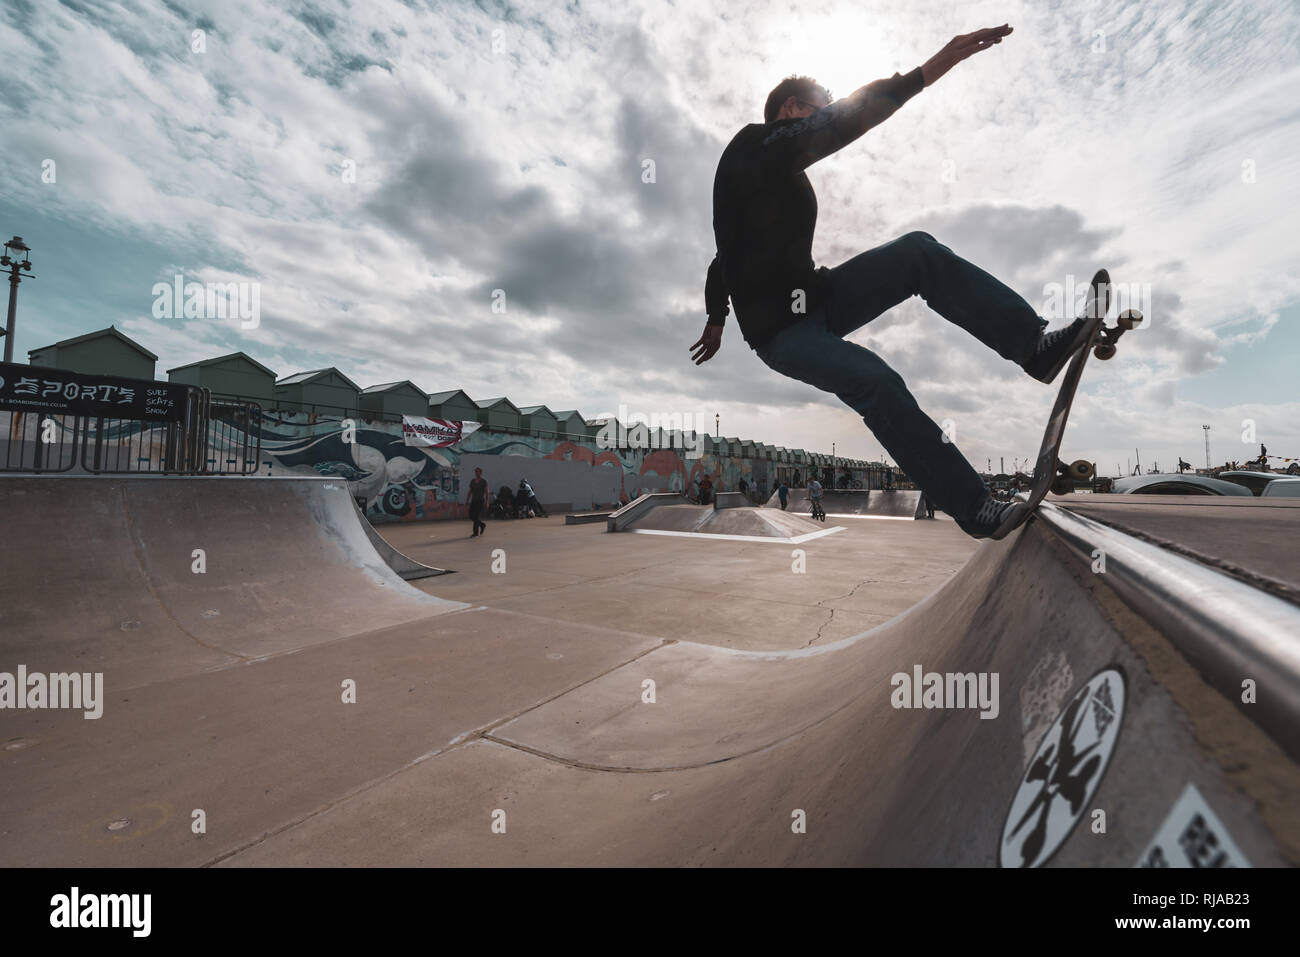 A man skating performs a trick on a ramp at the Hove Lagoon Skatepark,  Hove, Brighton, England Stock Photo - Alamy